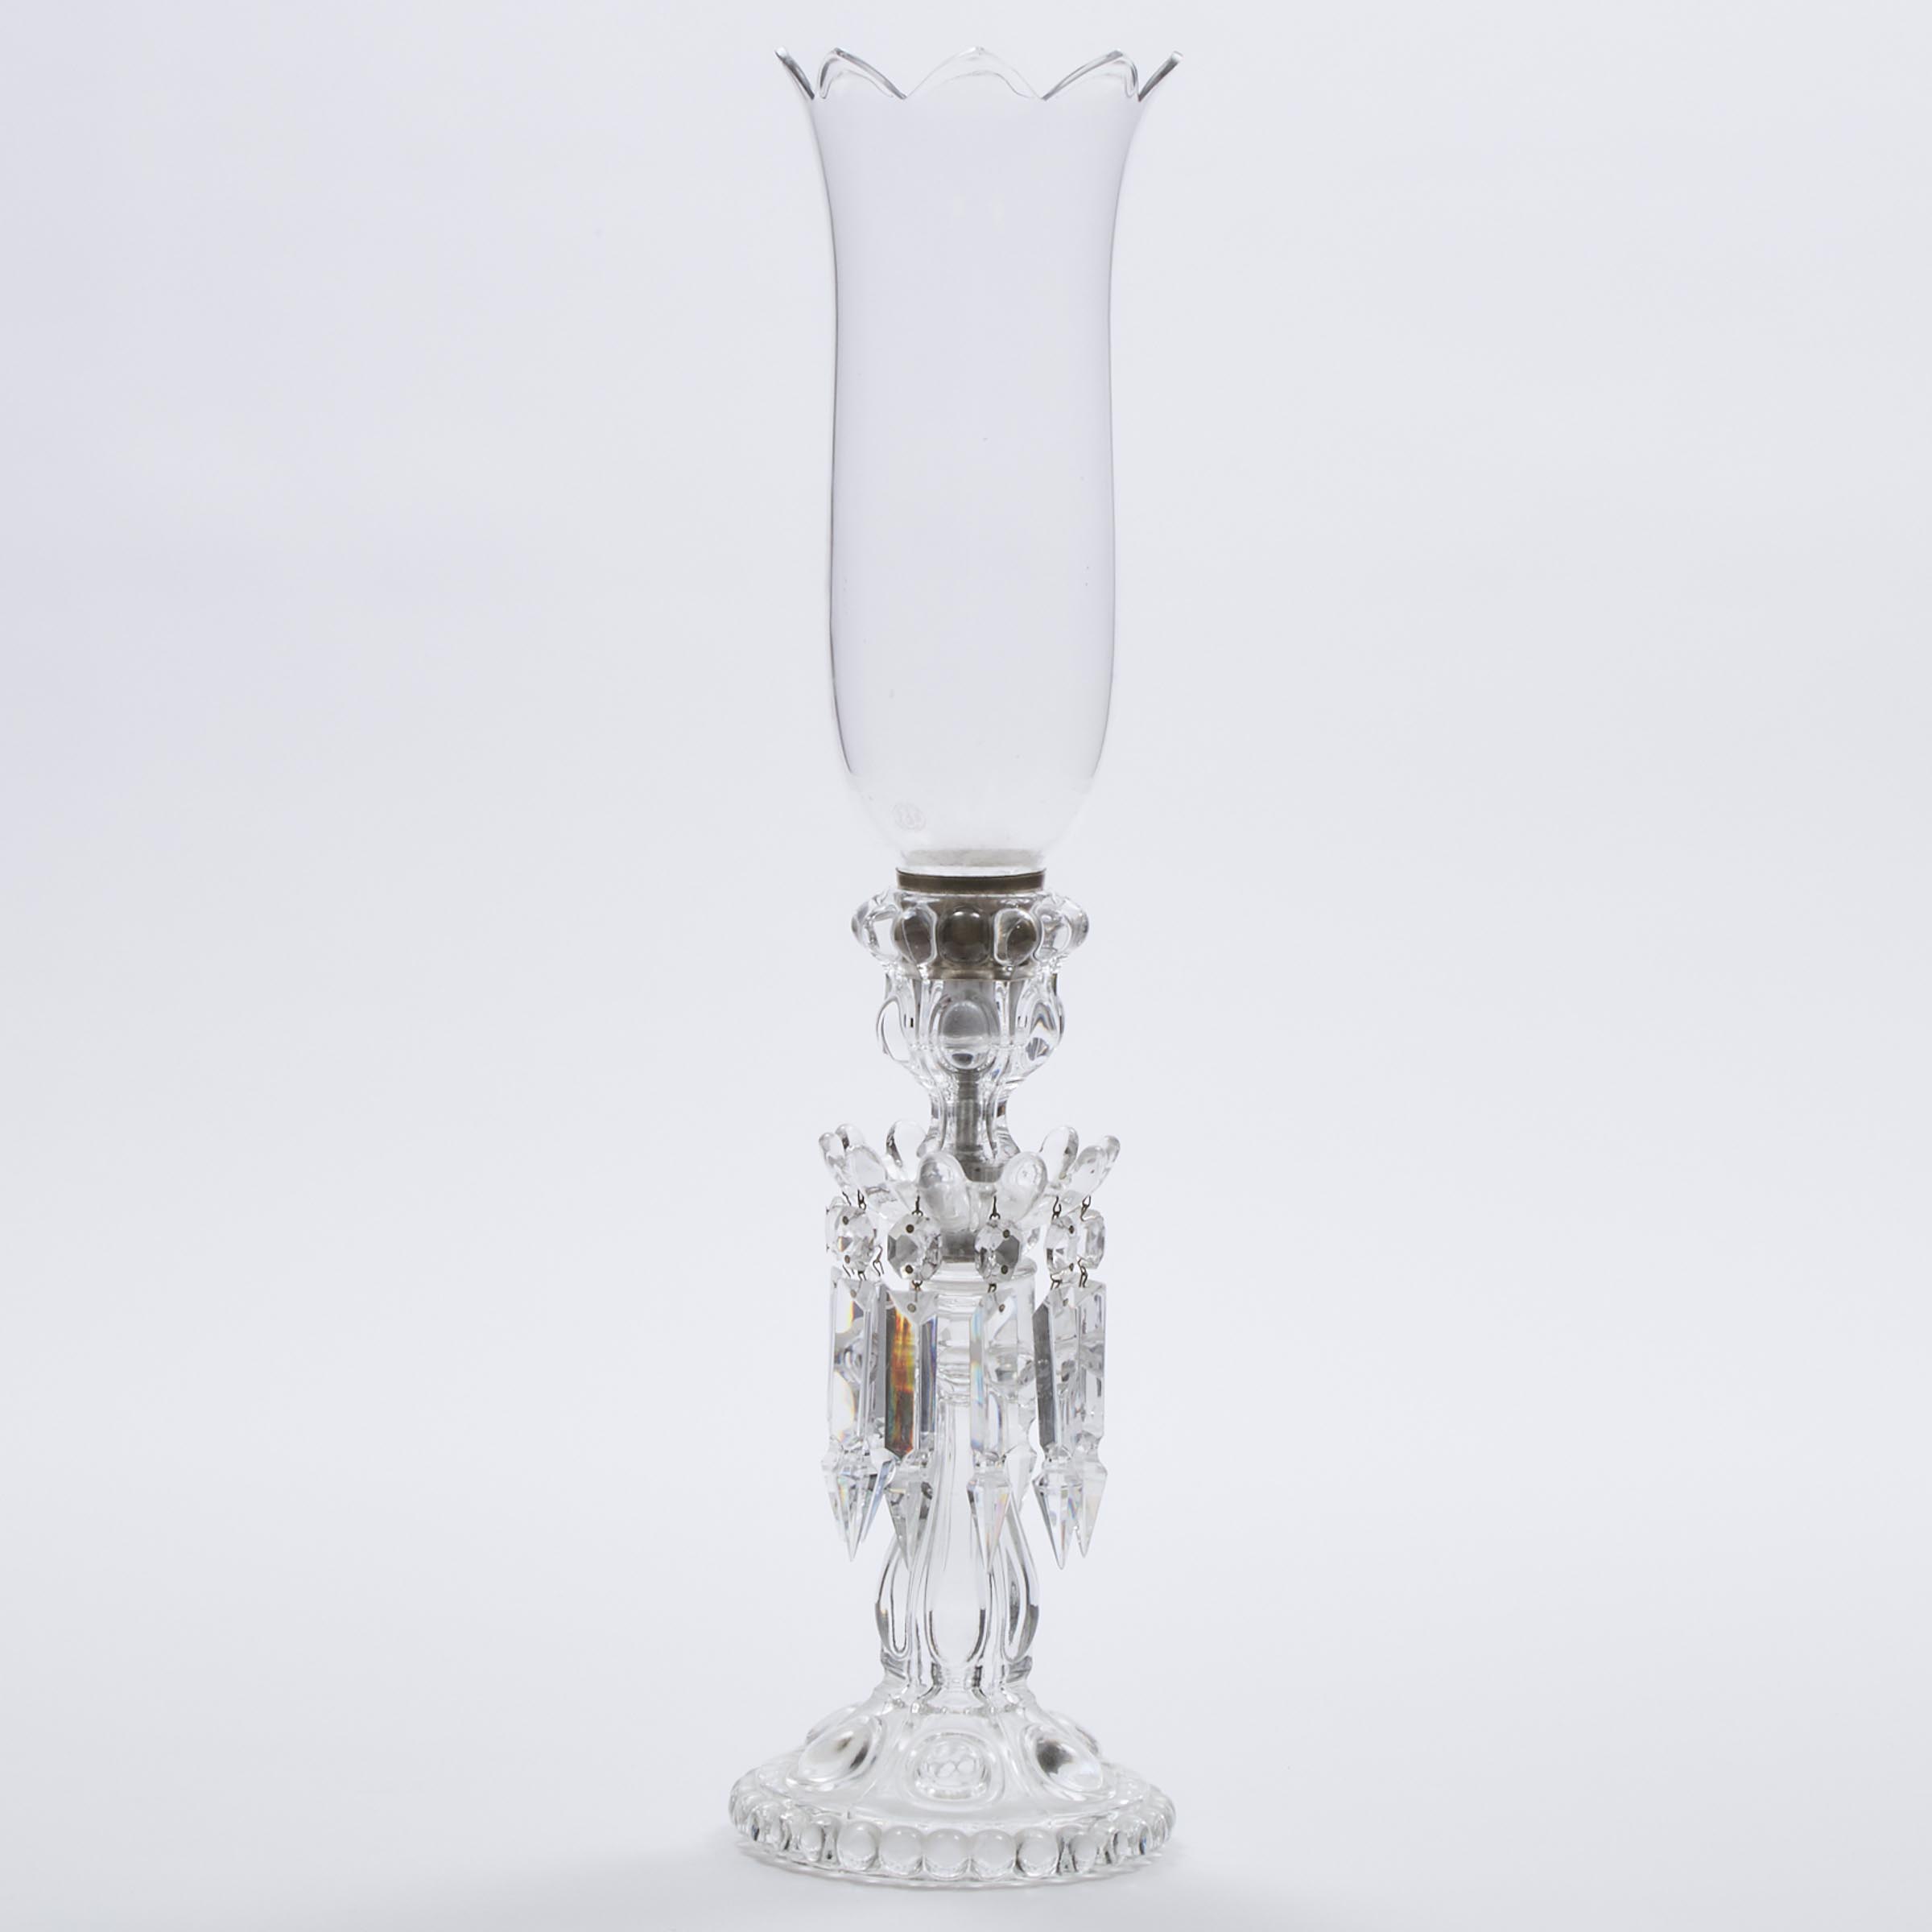 Baccarat Moulded and Cut Glass Candlestick Lustre with Shade, 20th century